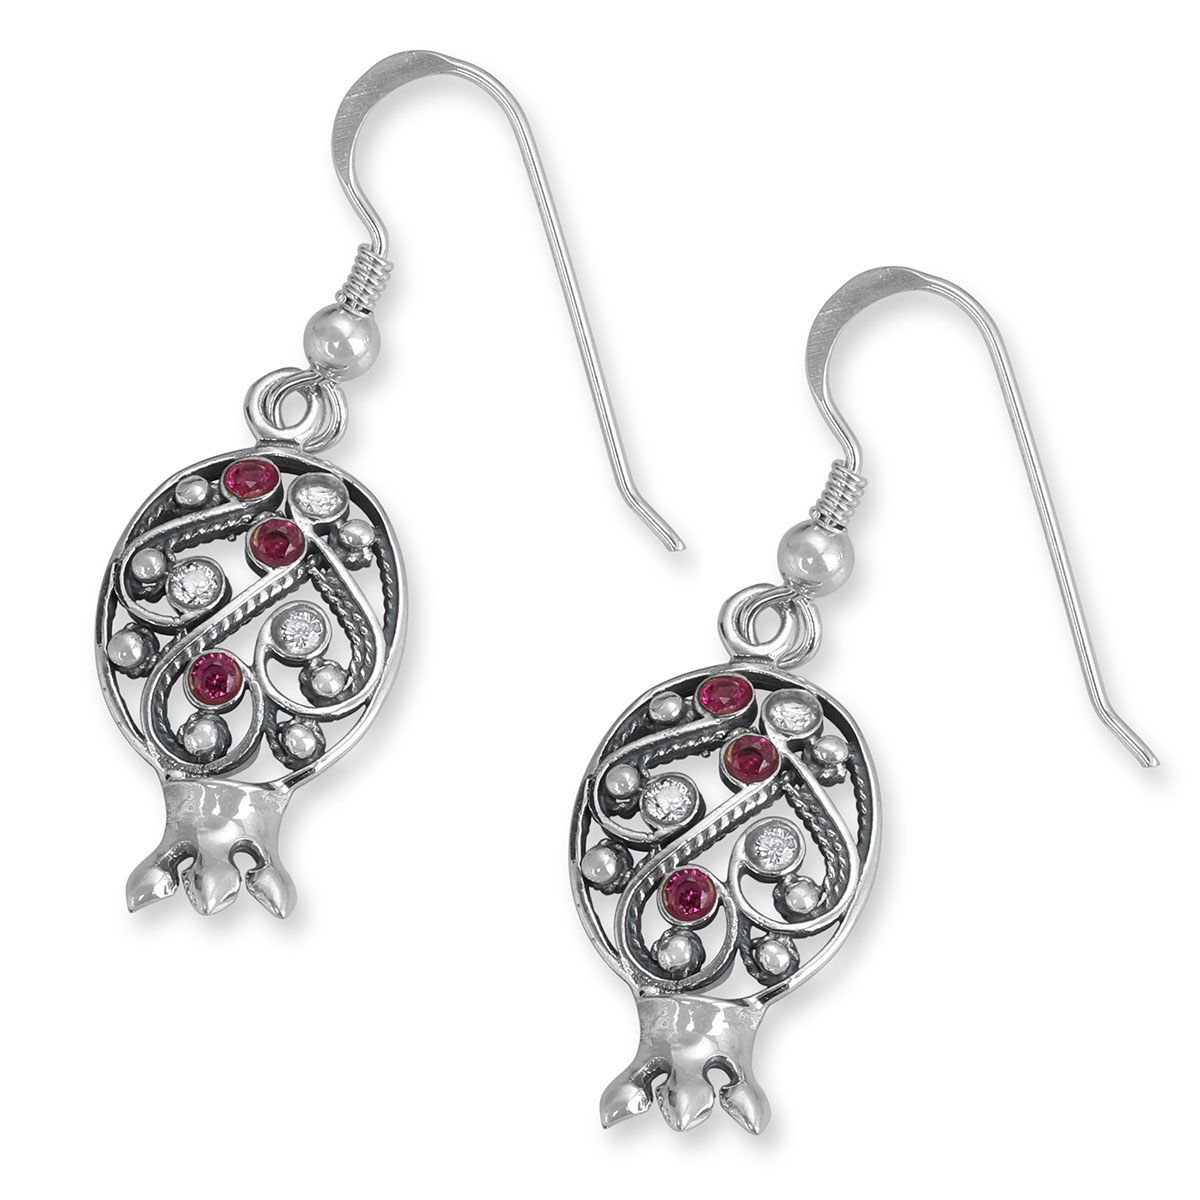 925 Sterling Silver Pomegranate Earrings With Rubies and Quartz - 1